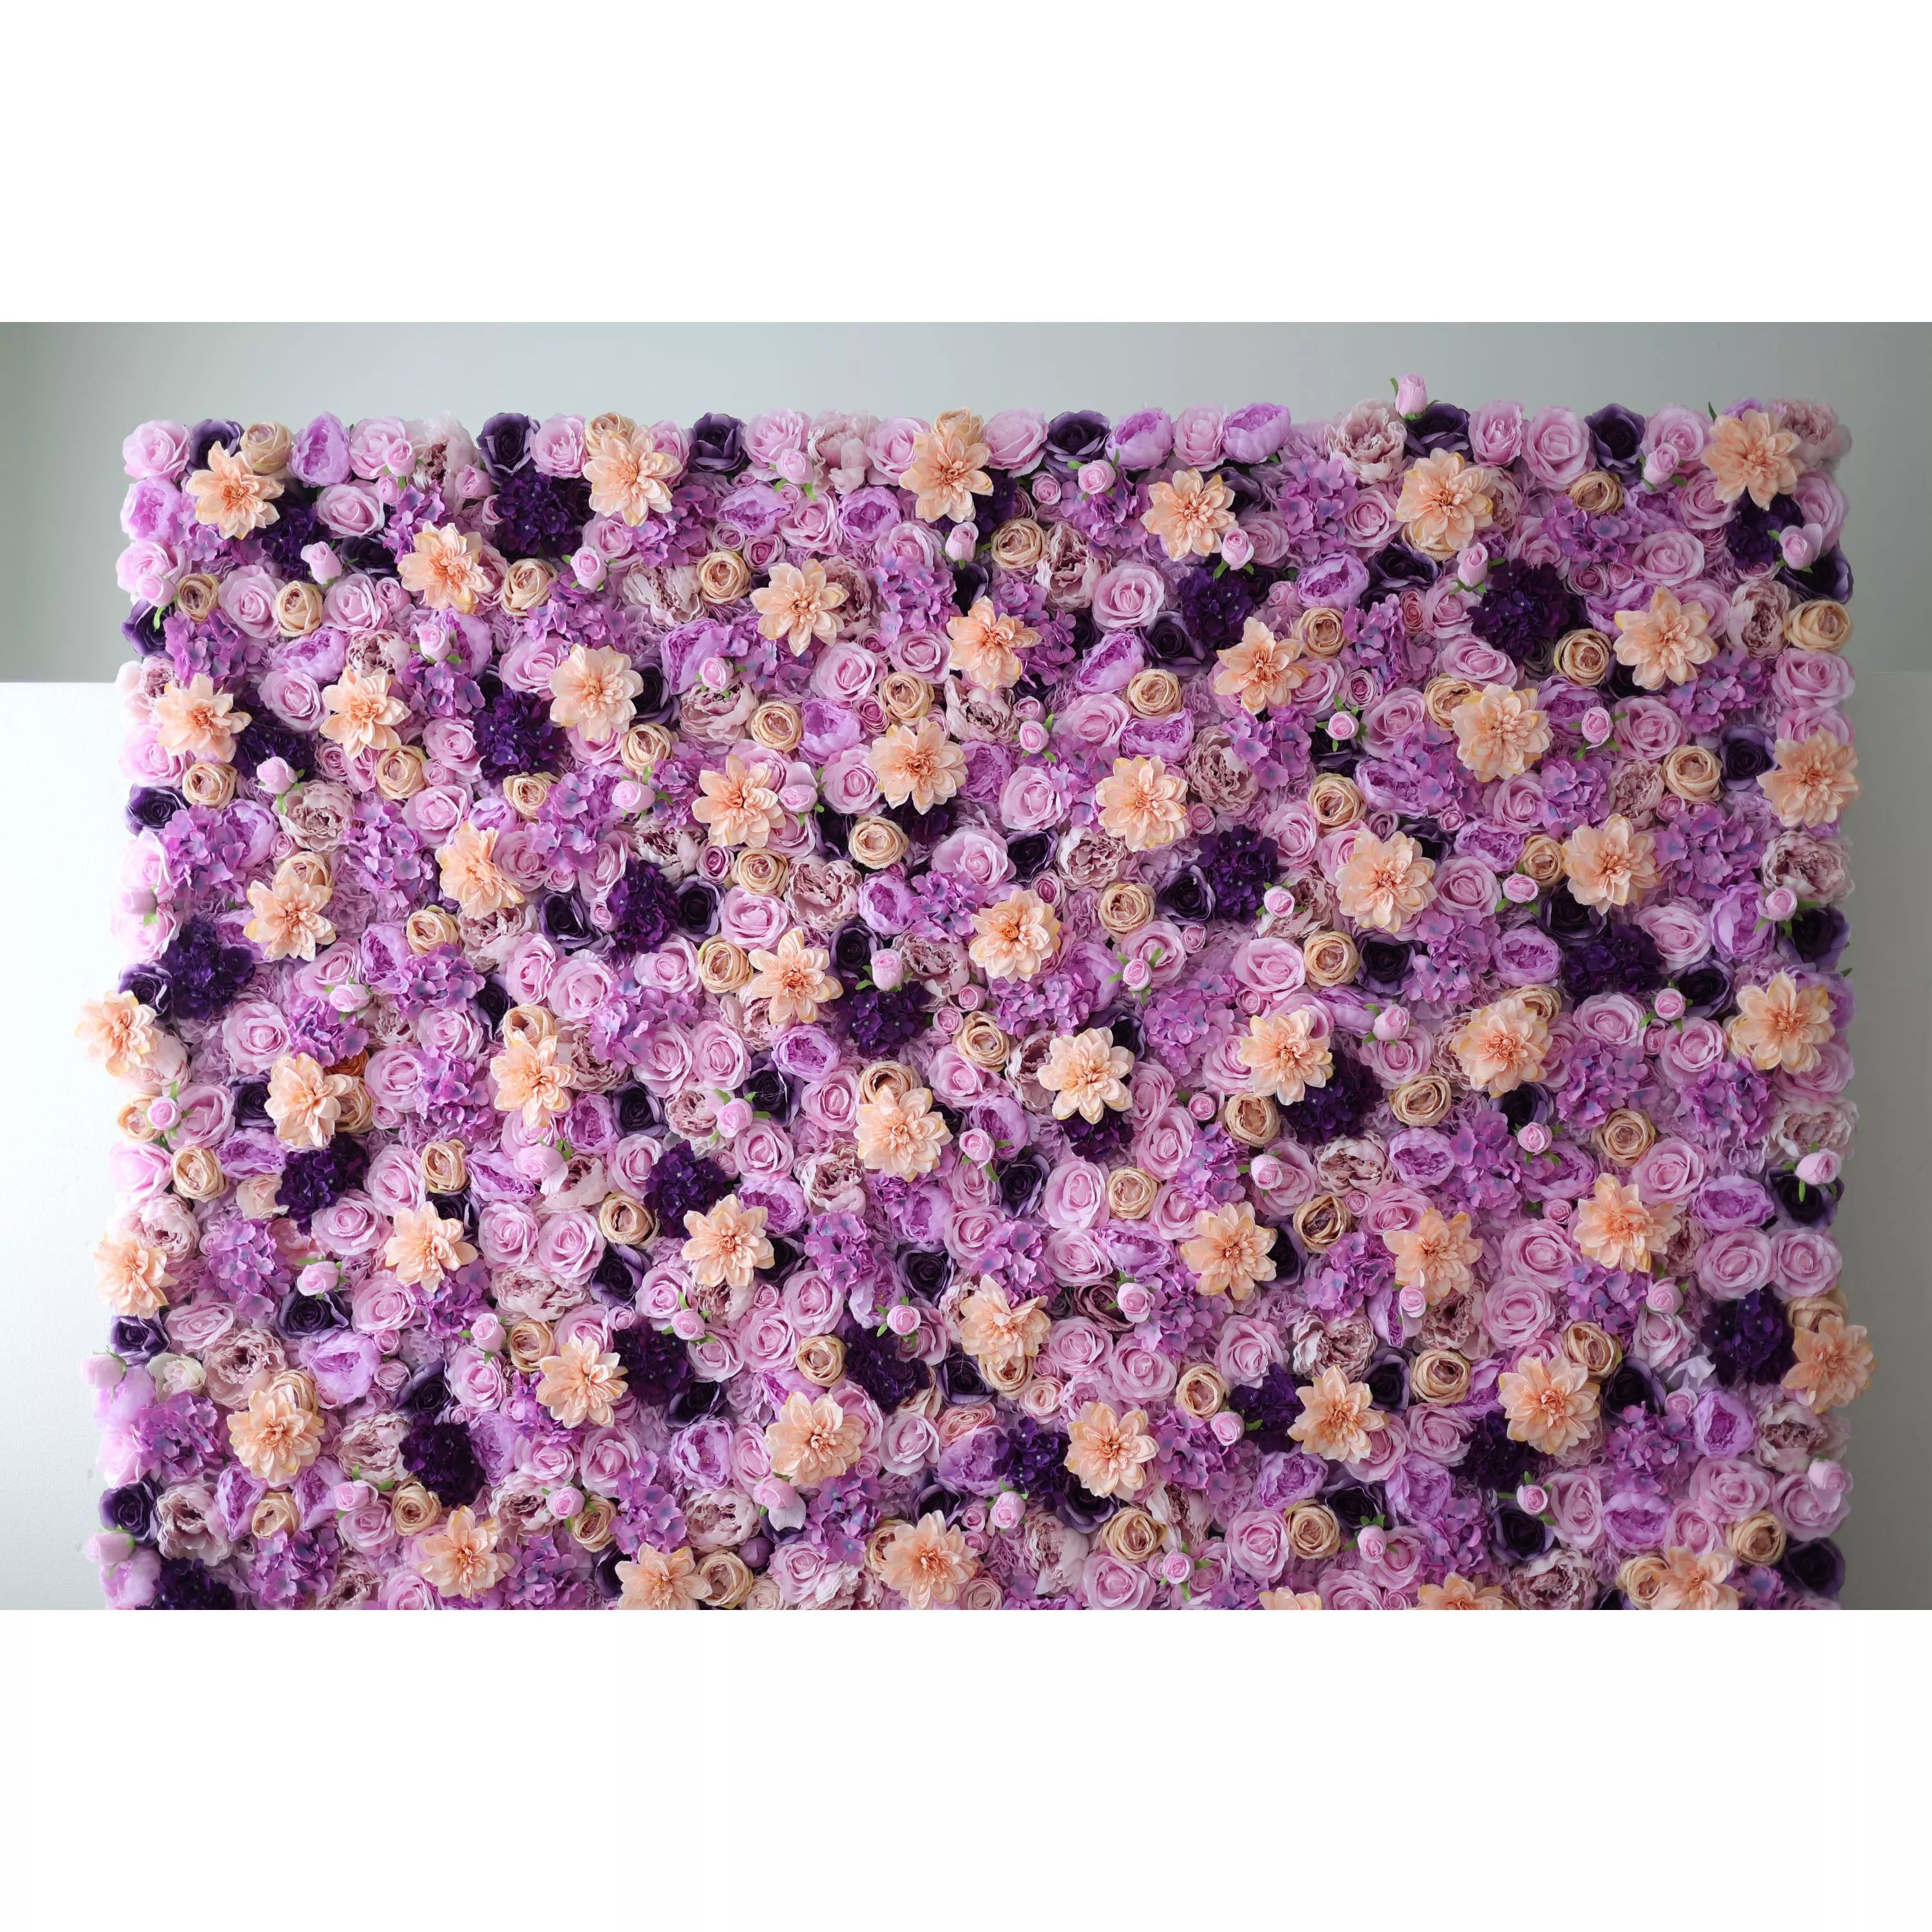 Valar Flowers Lavender Dreamscape: A Lush Symphony of Violet & Peach Blooms – Ultimate Elegance in Floral Artistry-VF-206